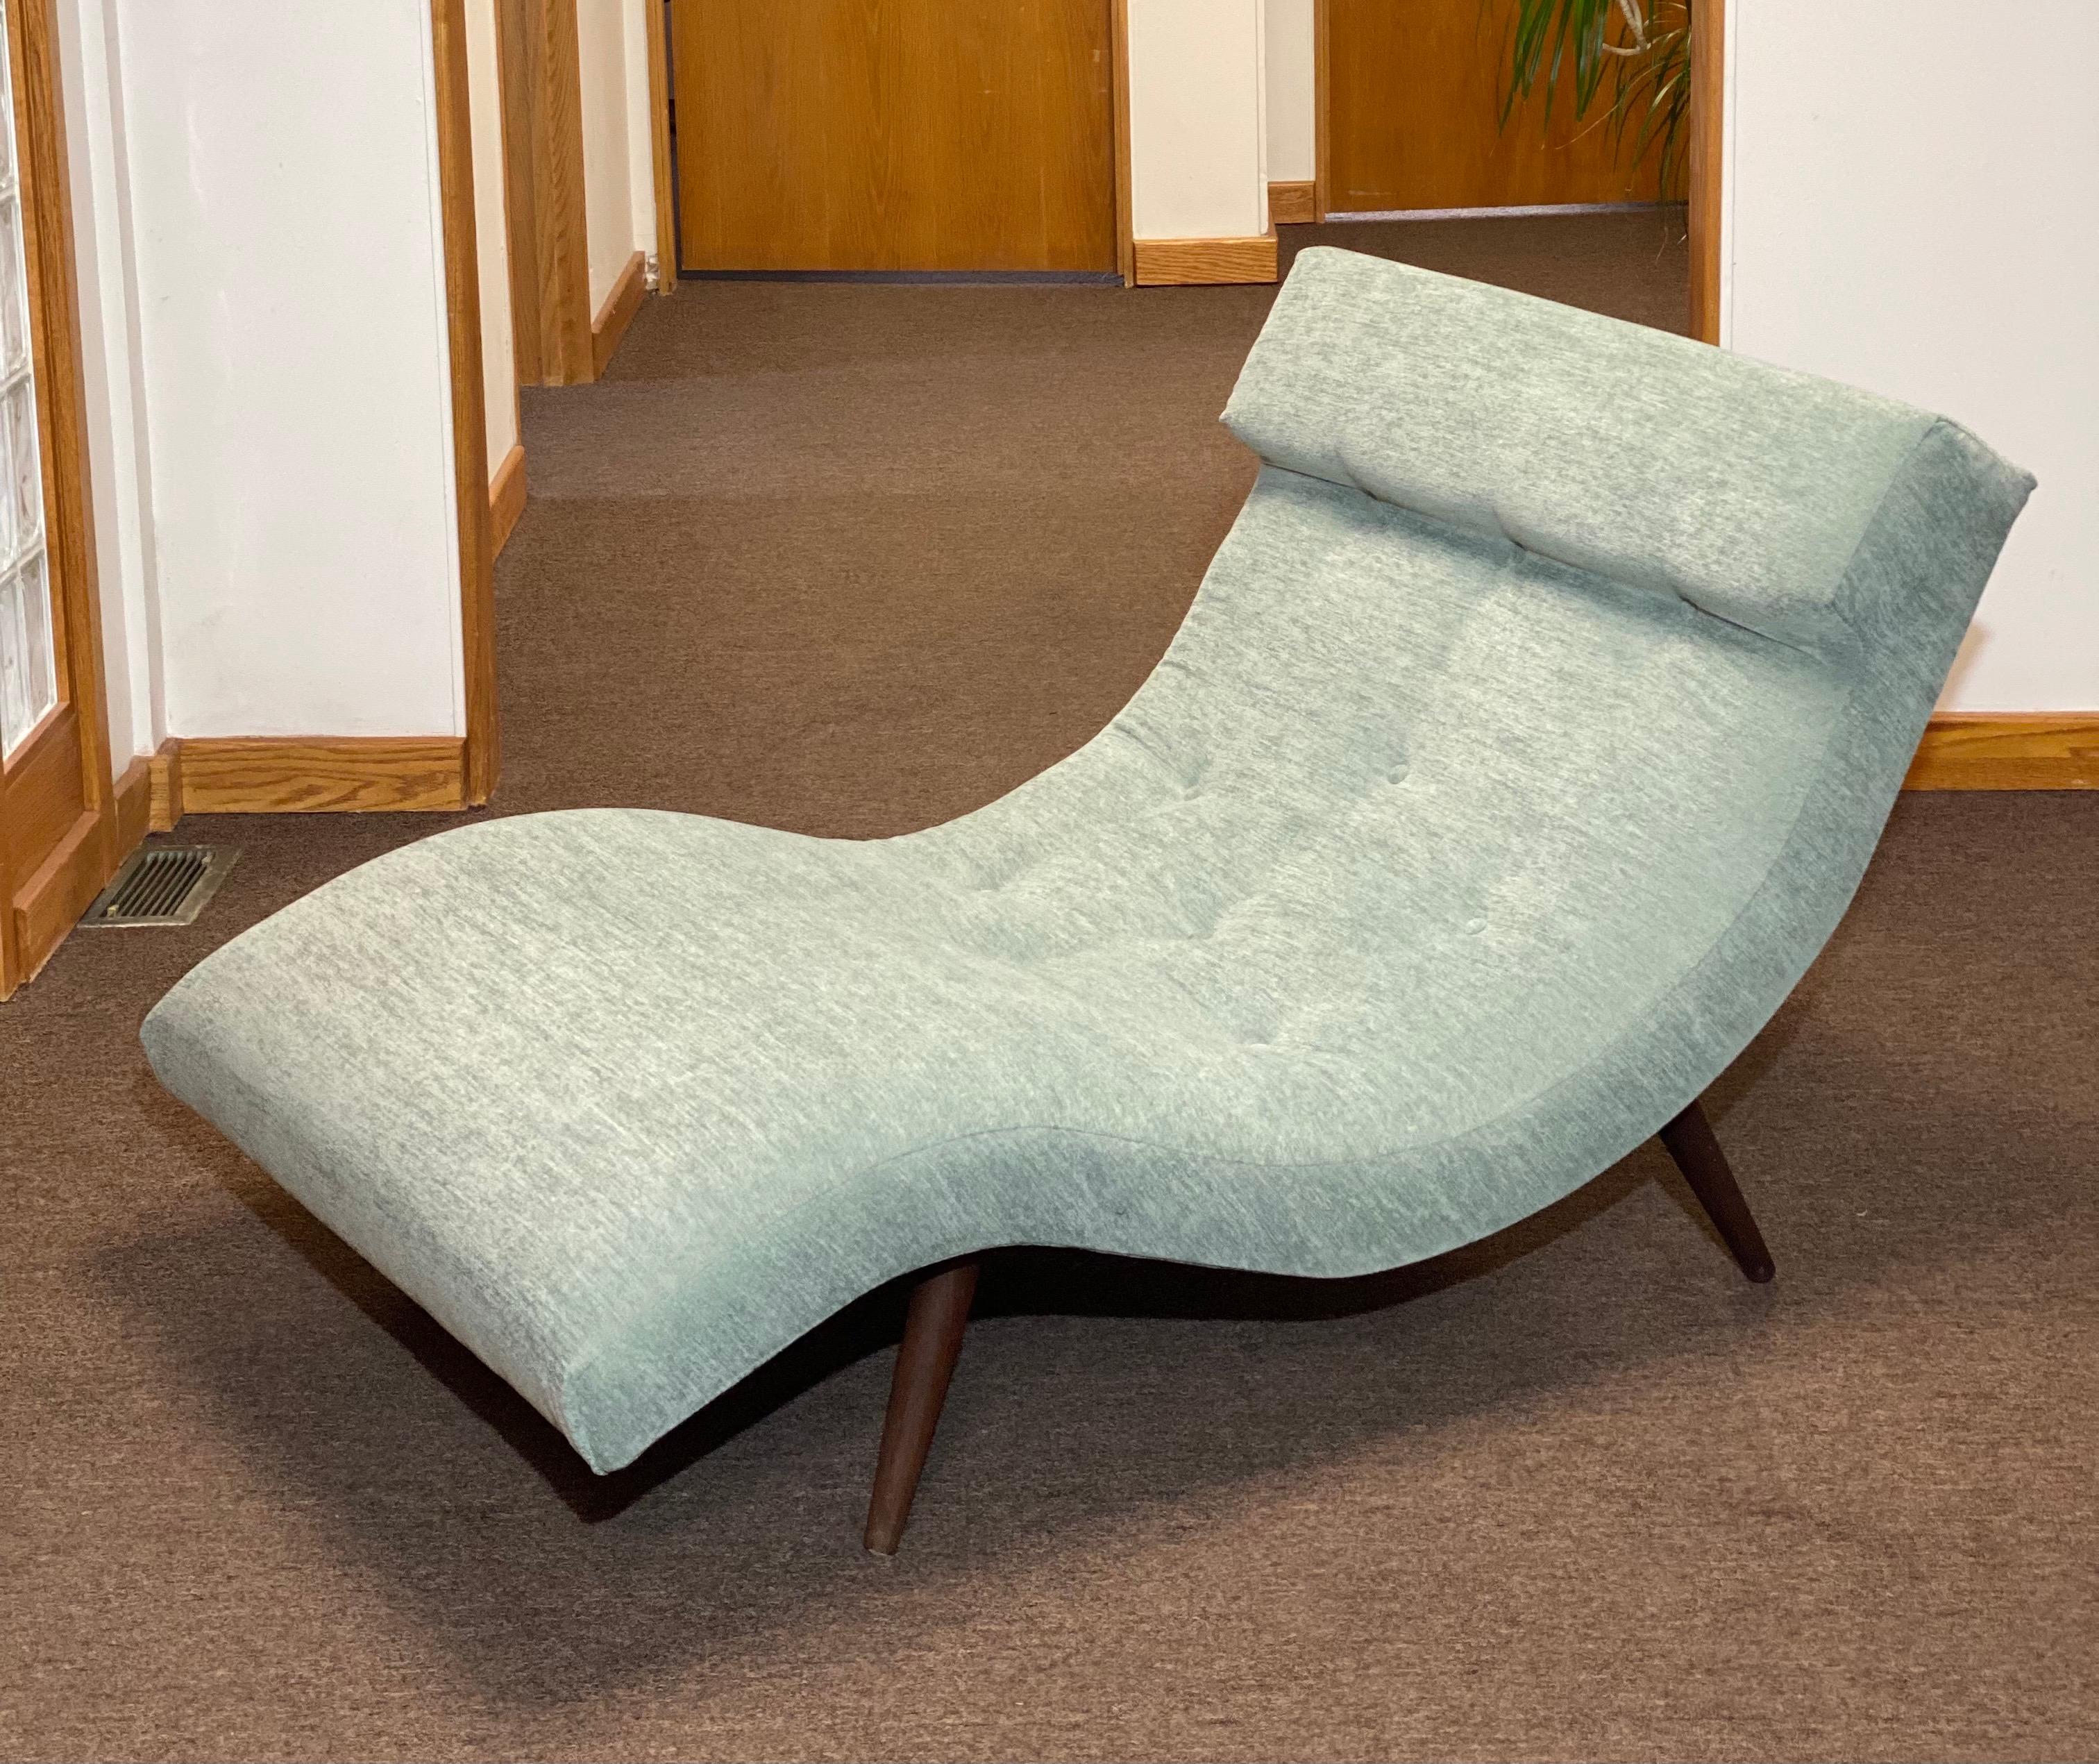 We are very pleased to offer a Mid-Century Modern chaise lounge by Adrian Pearsall for Craft Associates, circa the 1960s. With a silhouette sure to stand out, the model 108-C showcases a tufted body, a built-in pillow for head support and a simple